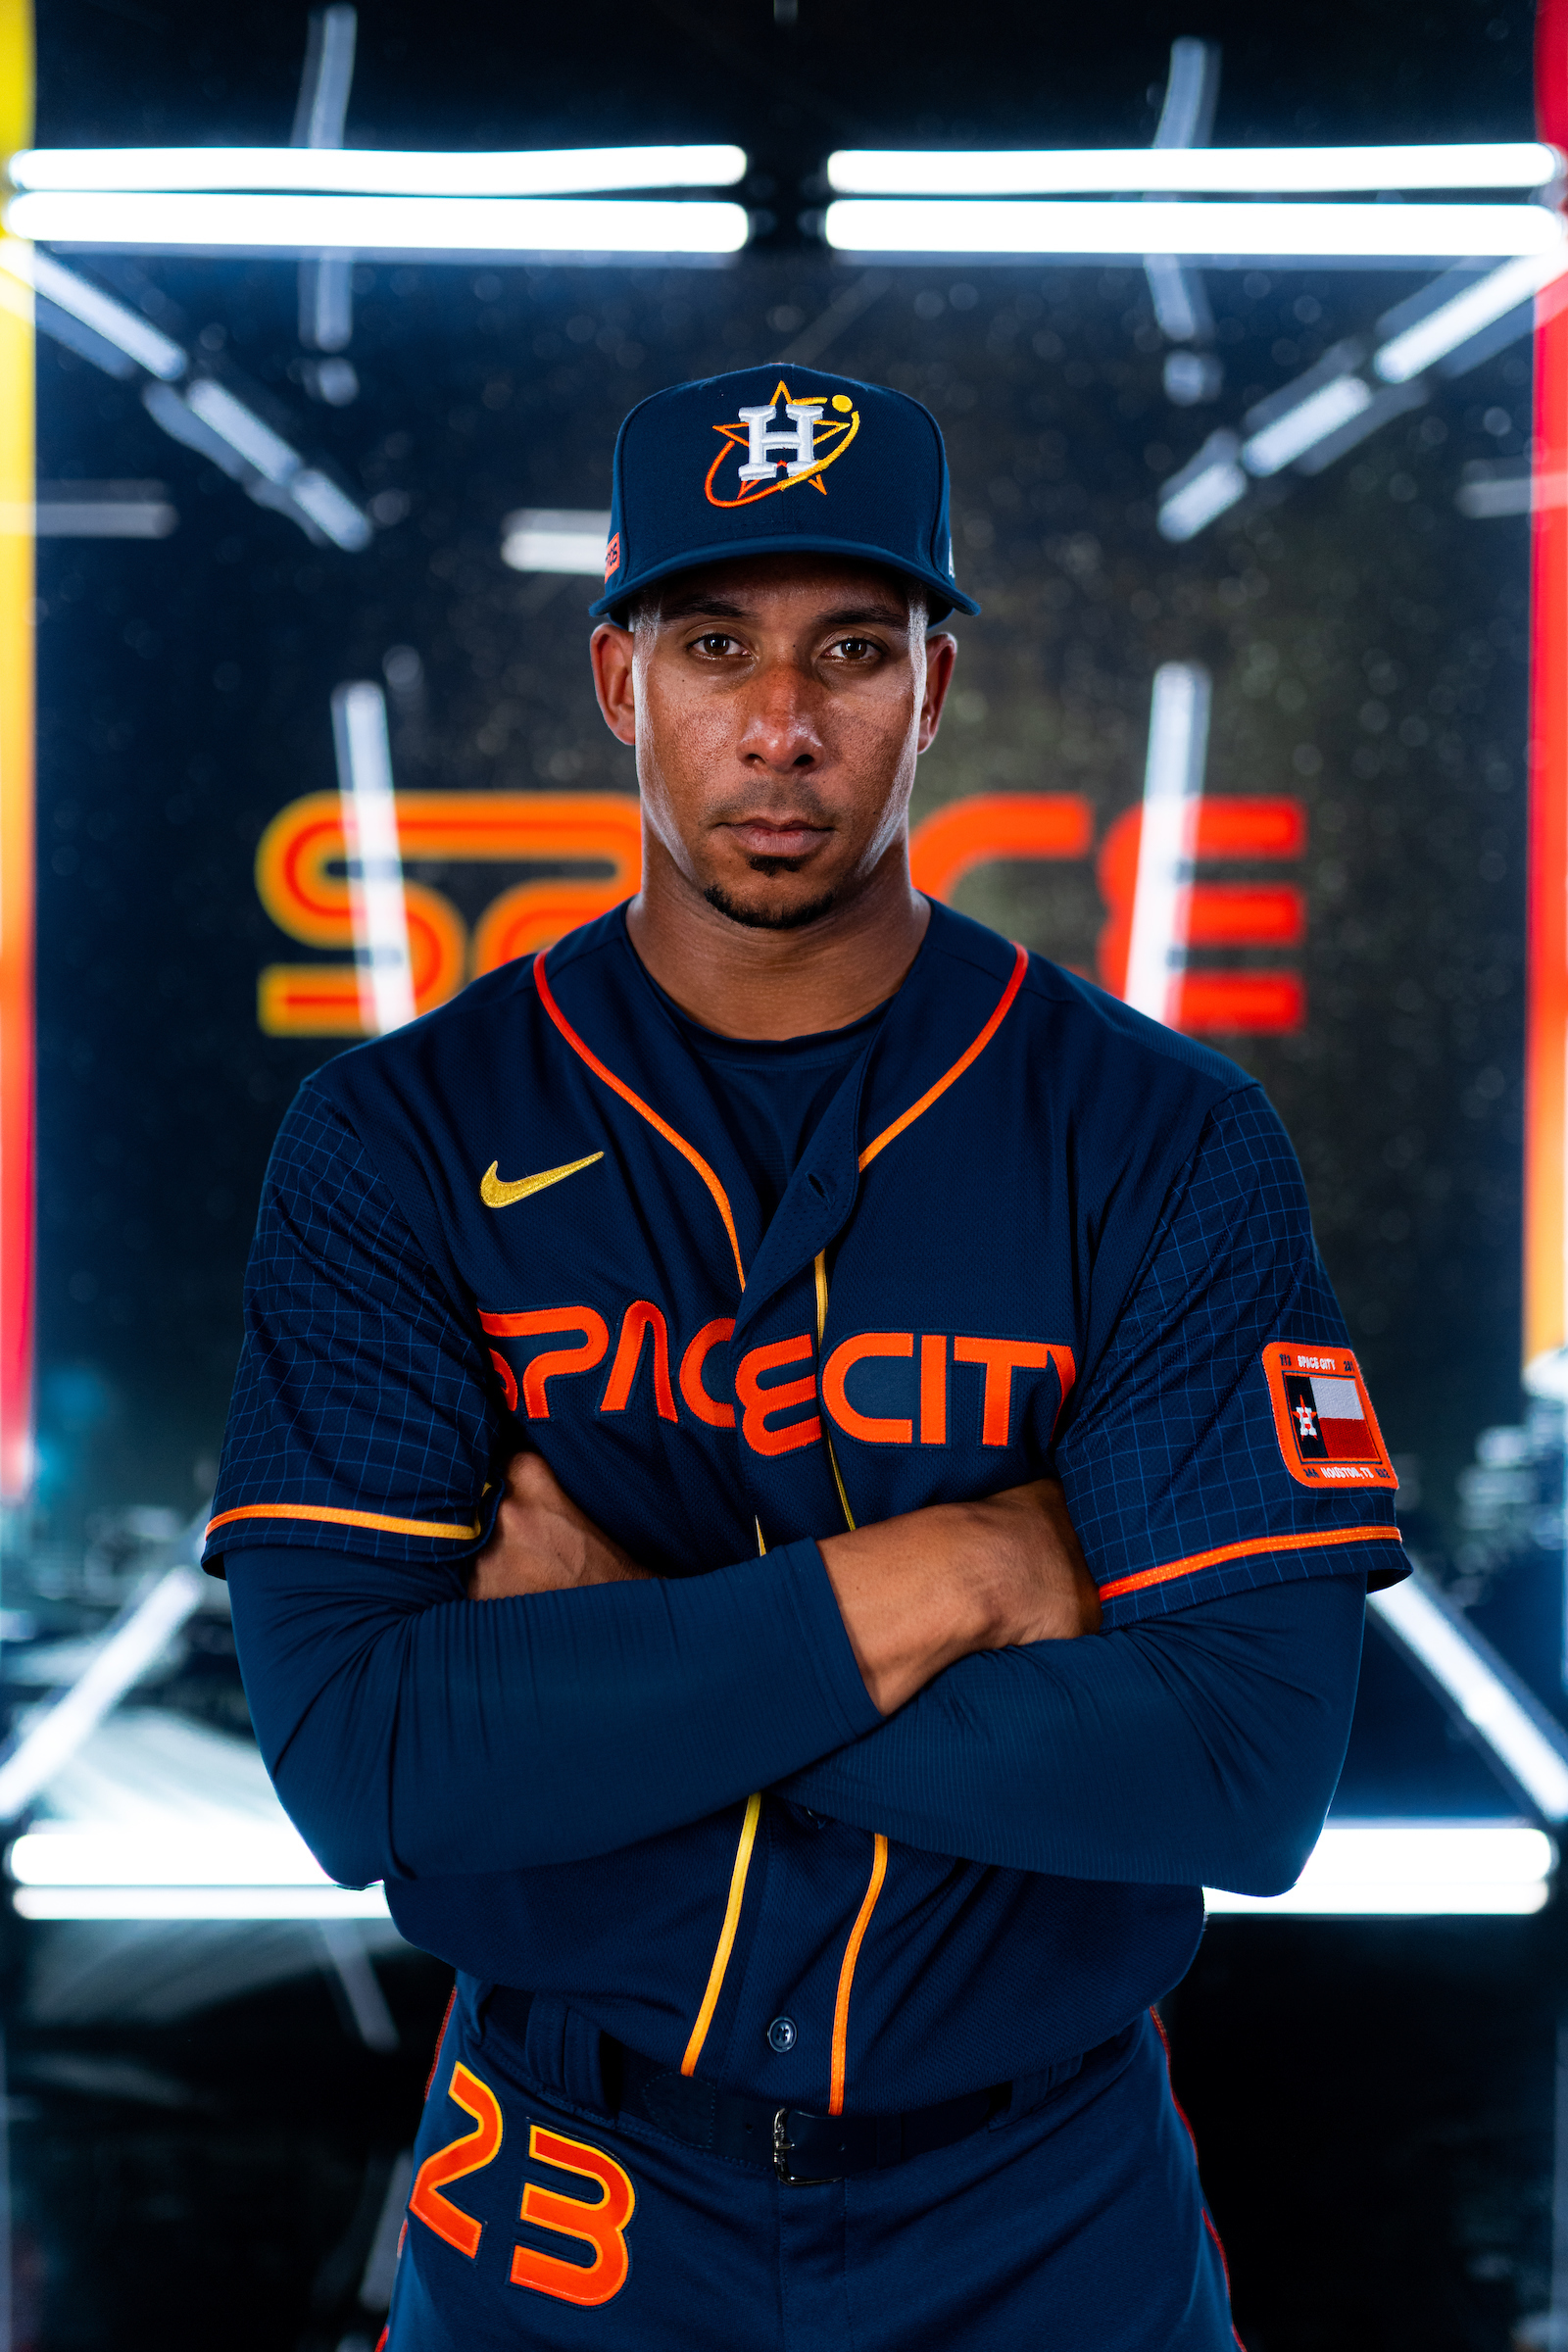 mlb astros space city jersey